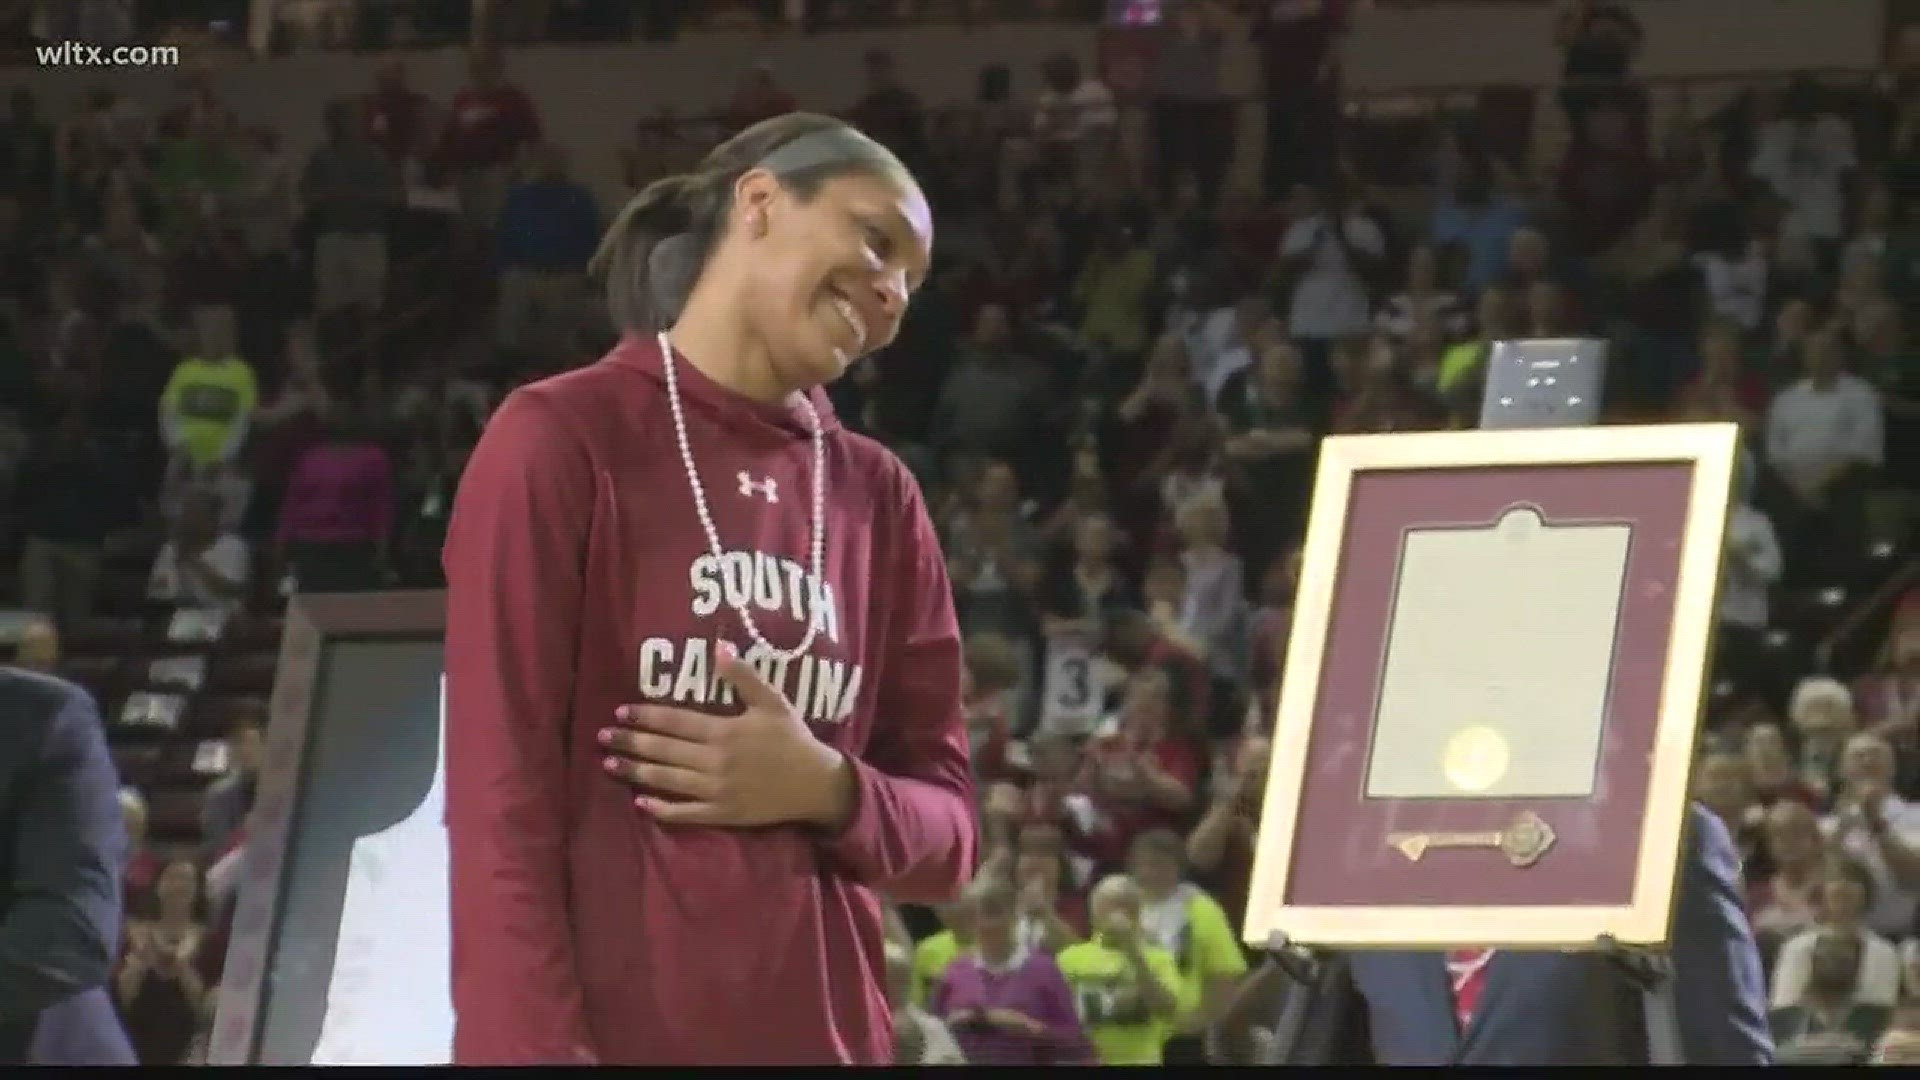 She will go down as the greatest player in the history of USC women's basketball and Thursday night saw A'ja Wilson take her final regular season bow at the Colonial Life Arena.